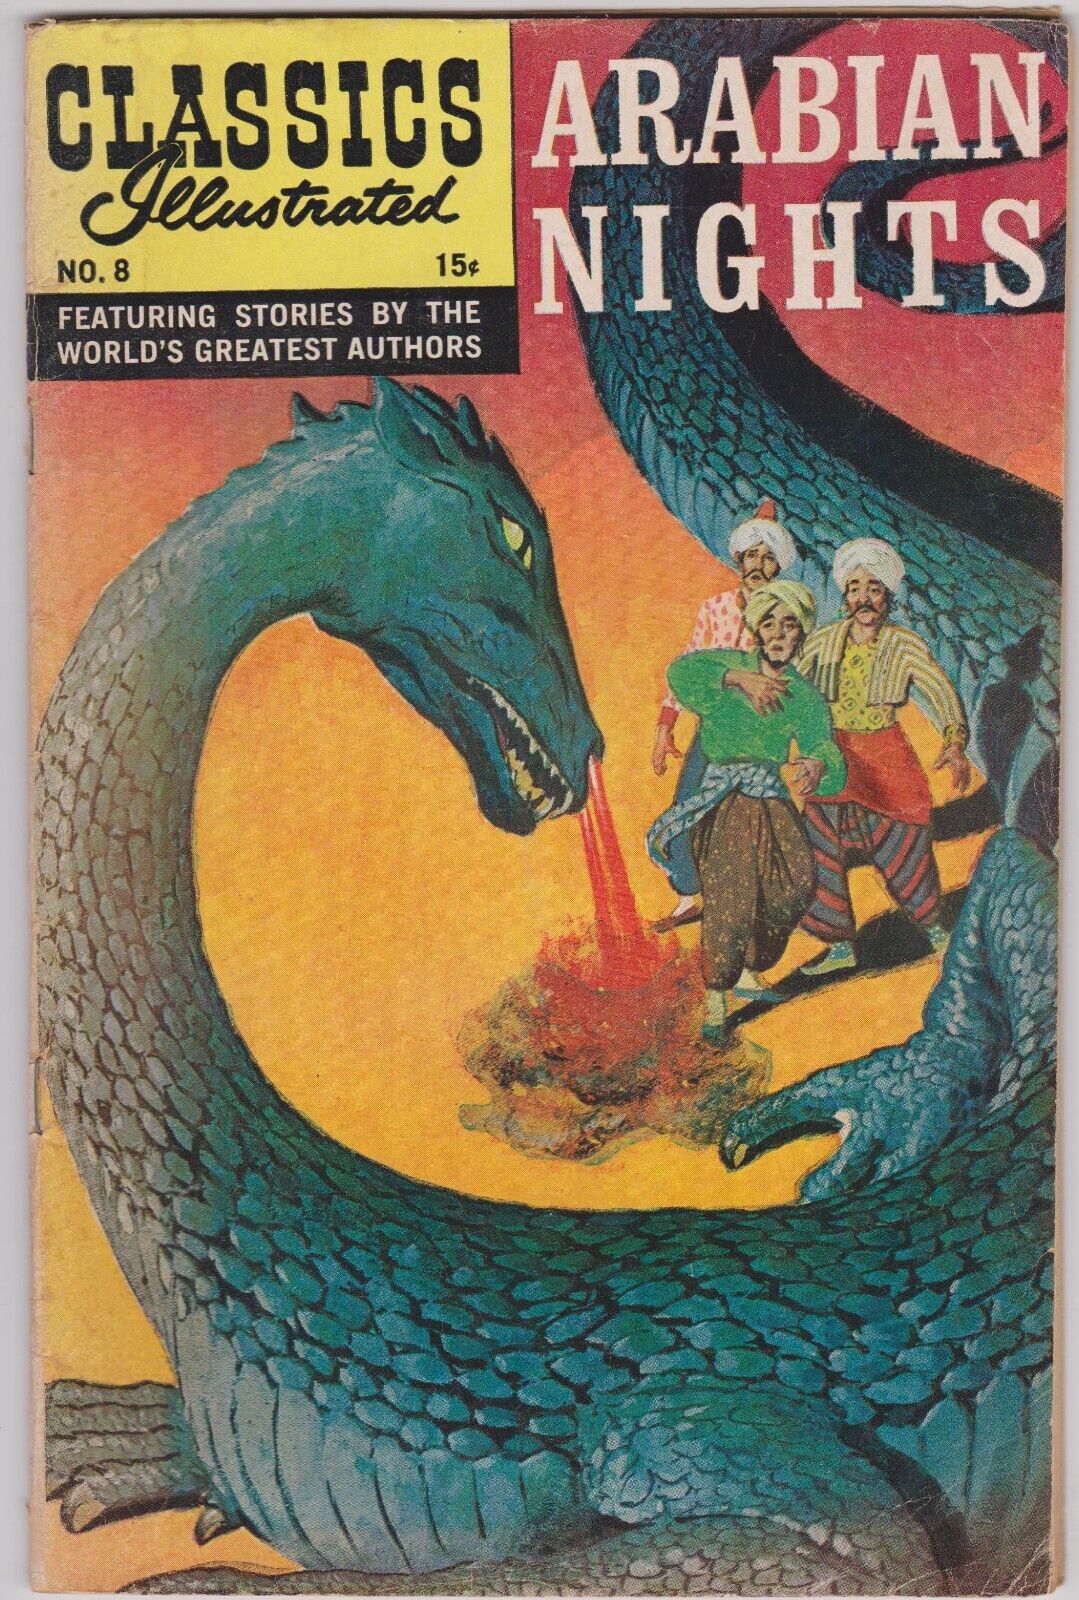 CLASSICS ILLUSTRATED # 8 THE ARABIAN NIGHTS  HRN: 164  NEW COVER   GILBERTON CO.